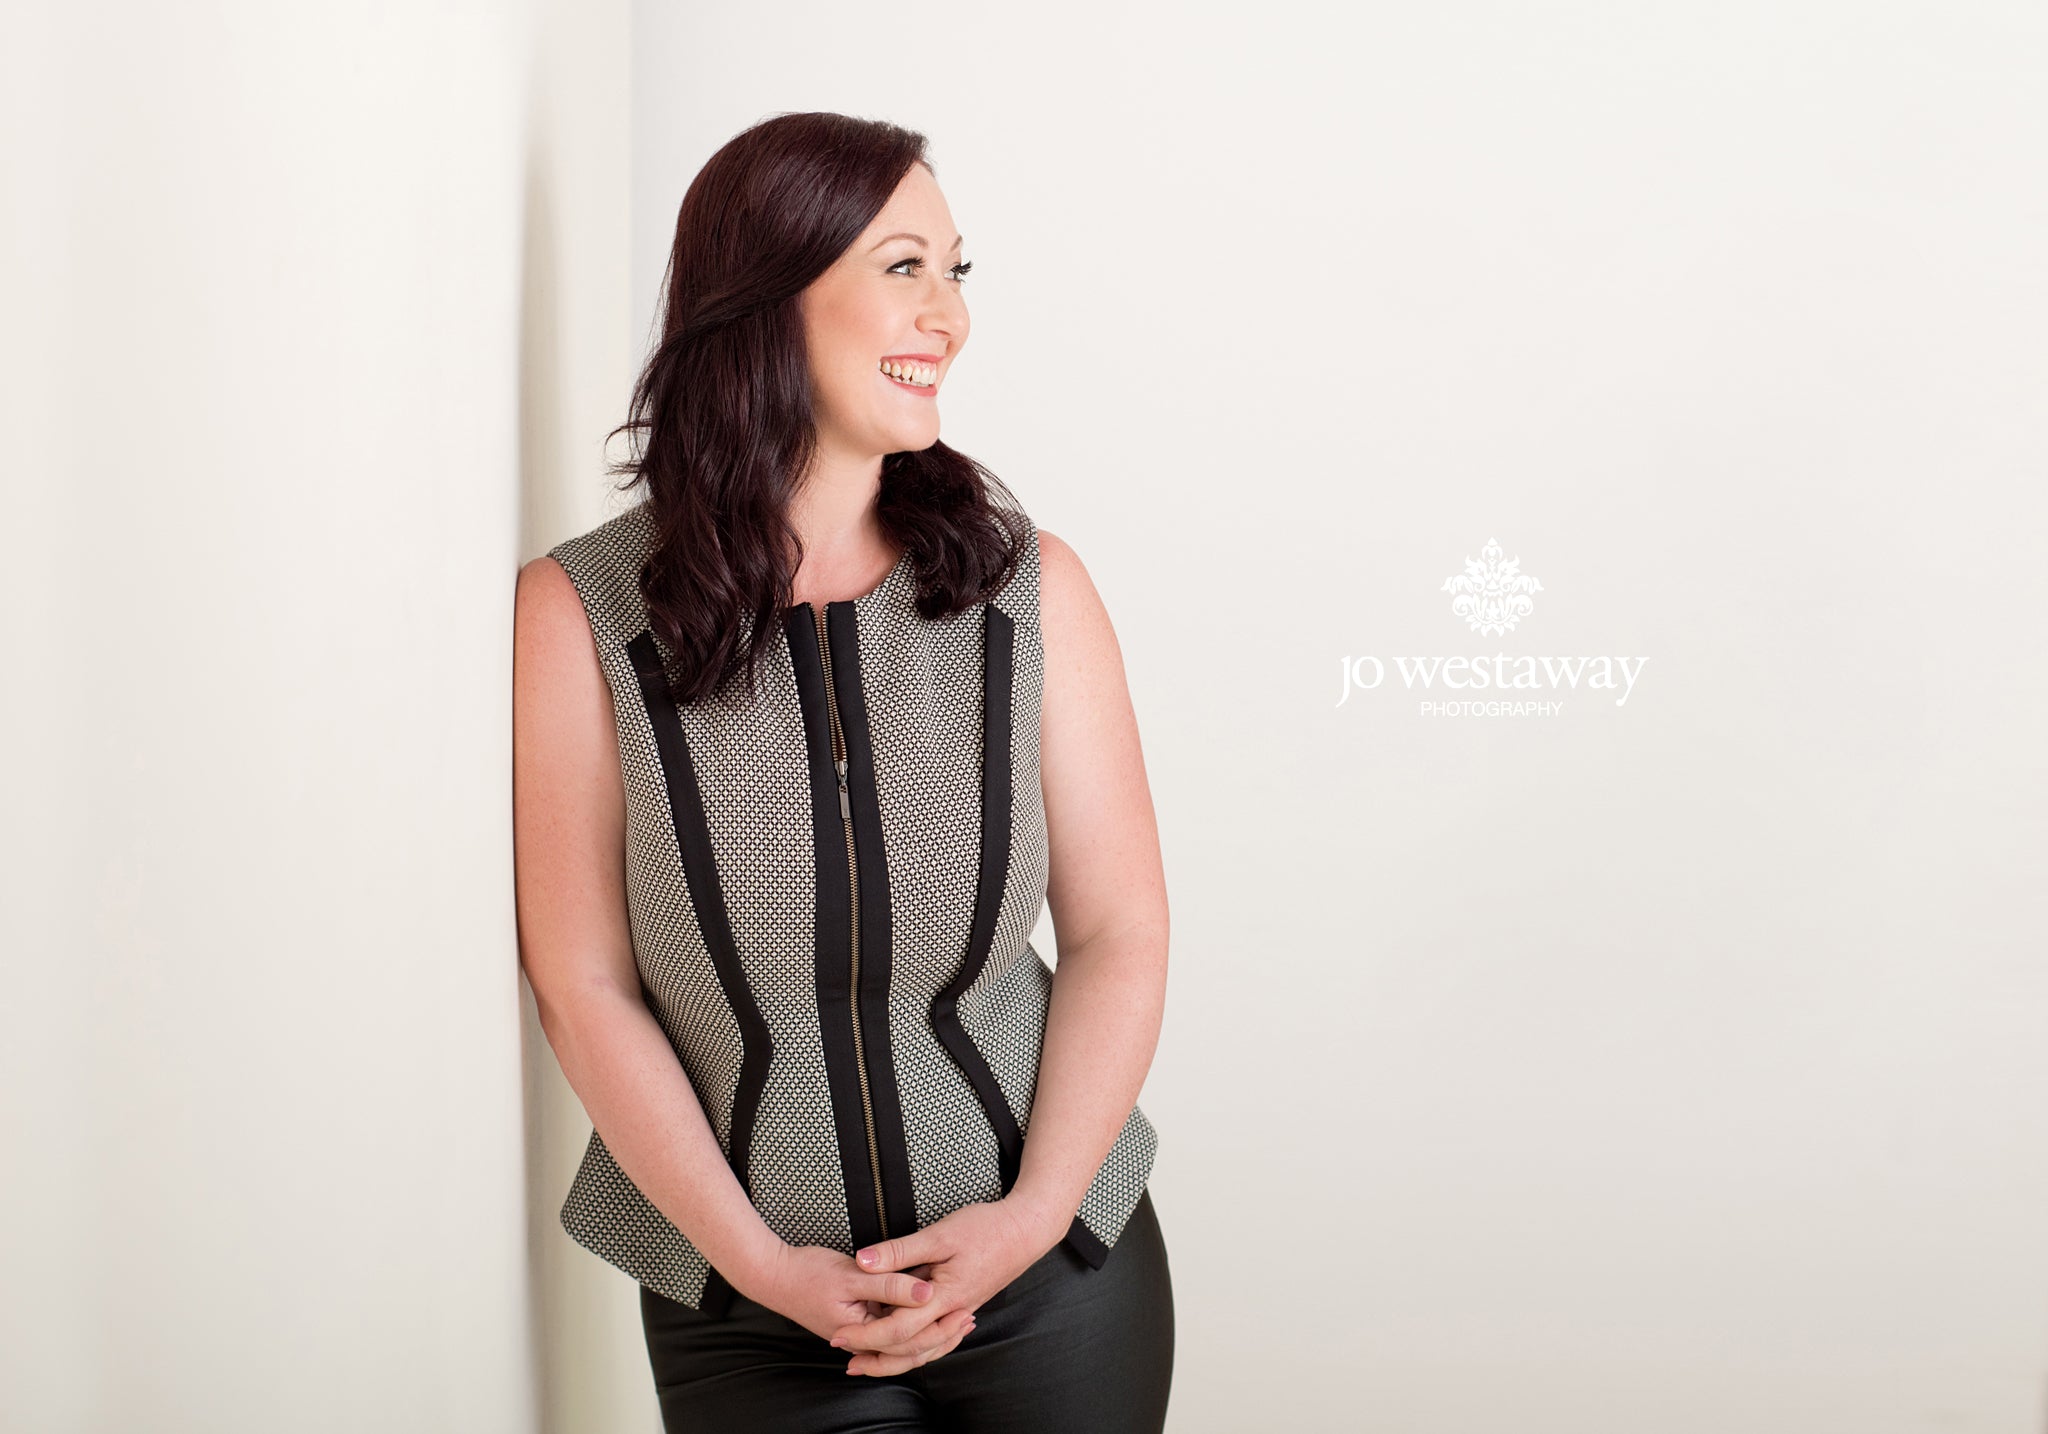 Personal brand portraits for websites, socials and print - Brisbane photographer